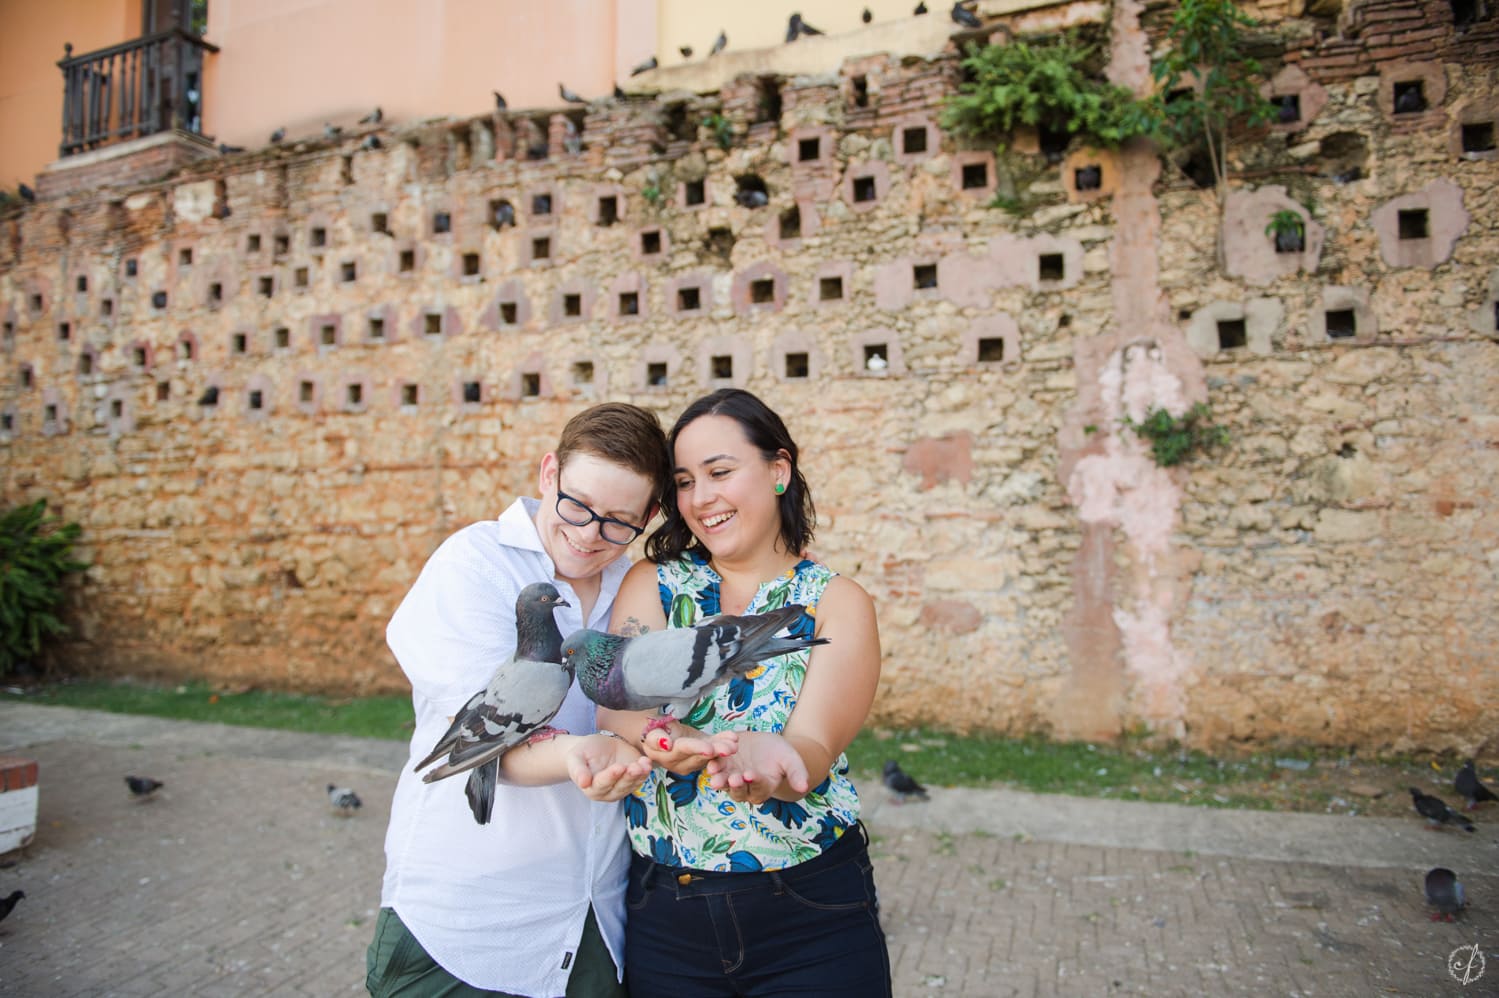 lgbt friendly wedding photographer Camille Fontanez captures Emily and Ana's engagement vacation portrait session in Old San Juan, Puerto Rico